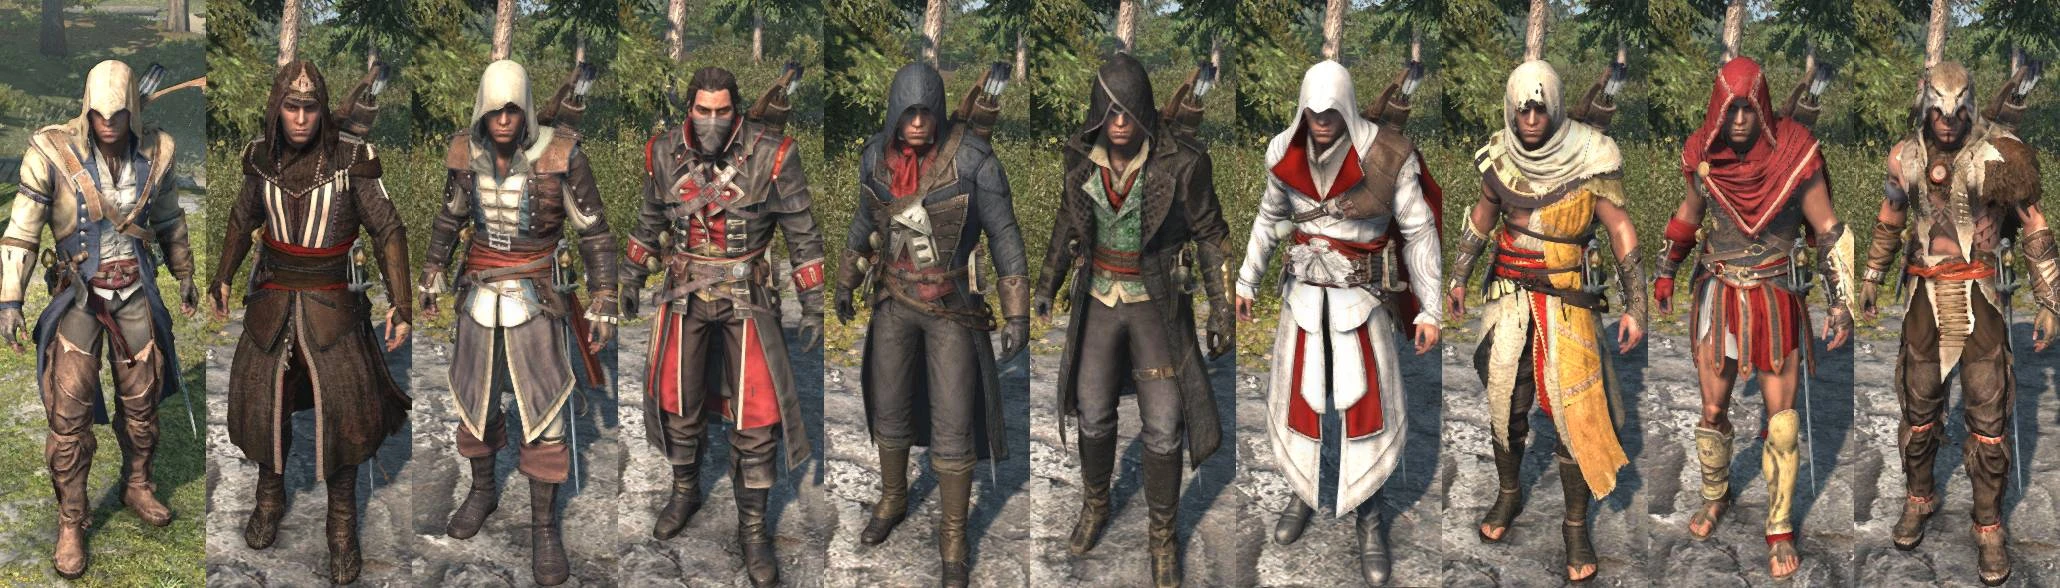 Steam Workshop::Assassin's Creed Unity Arno Dorian Outfit